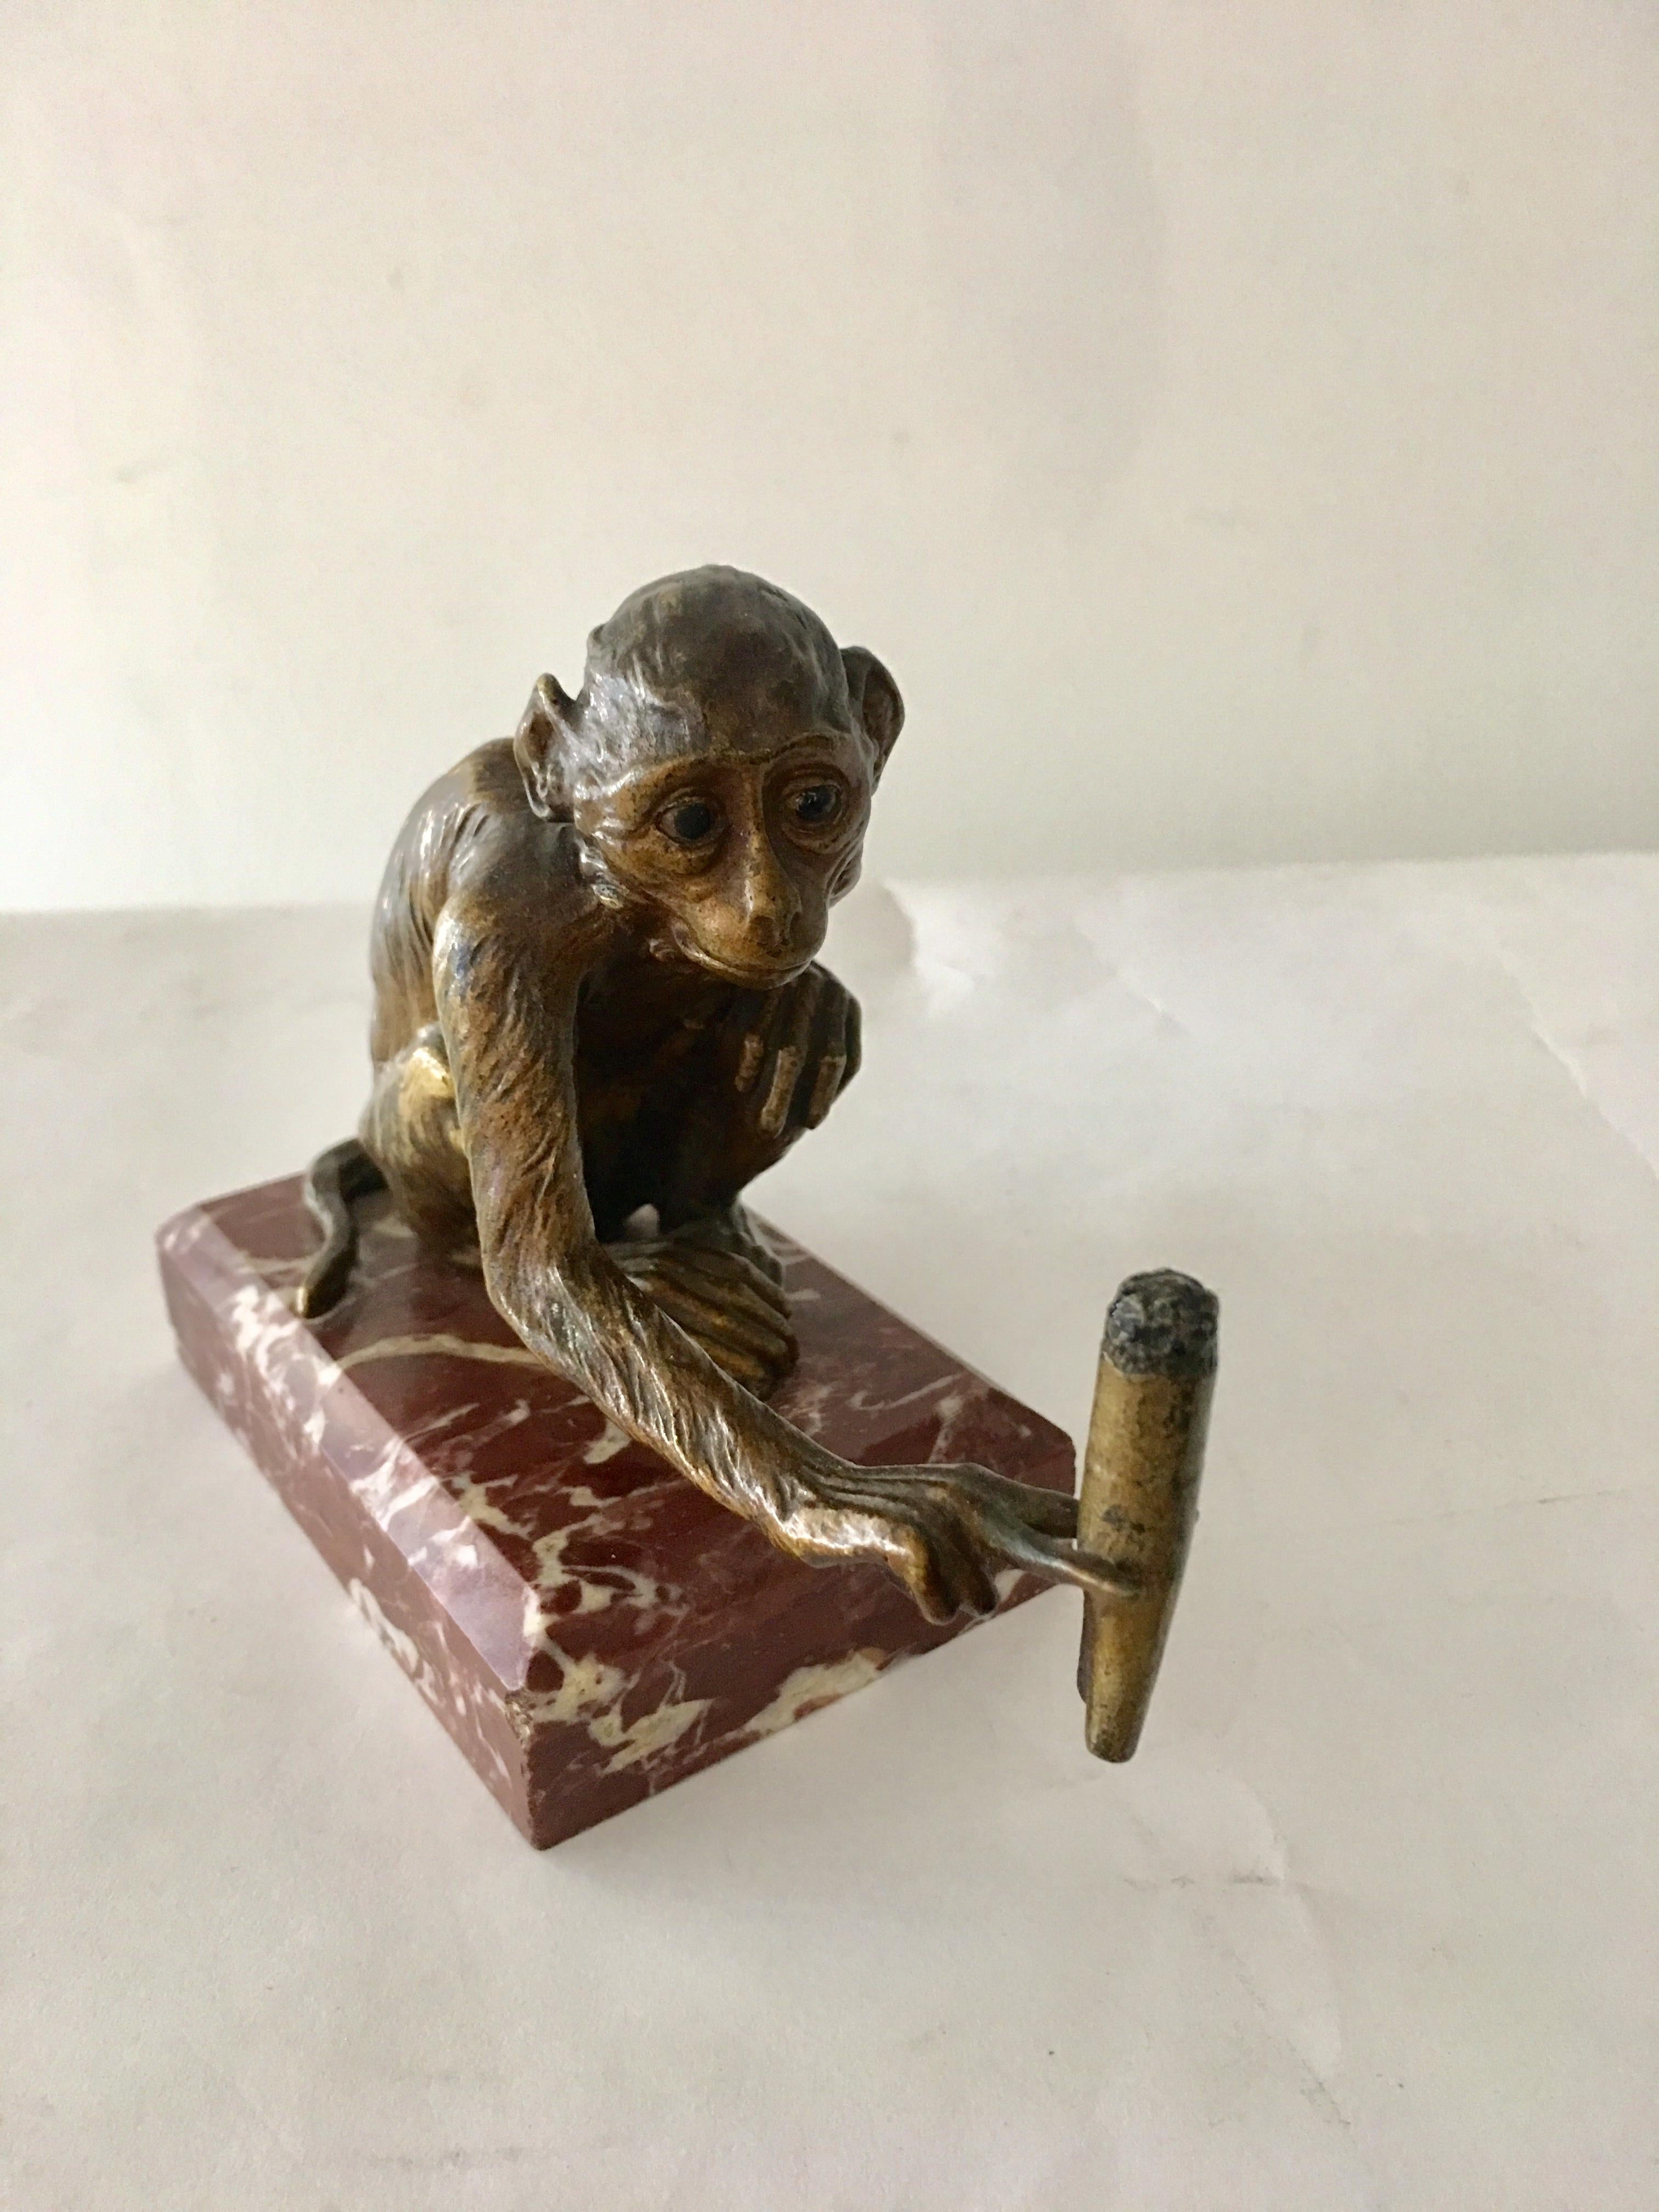 Very rare and unique sculpture. Monkey holding a cigar, solid bronze on marble base.